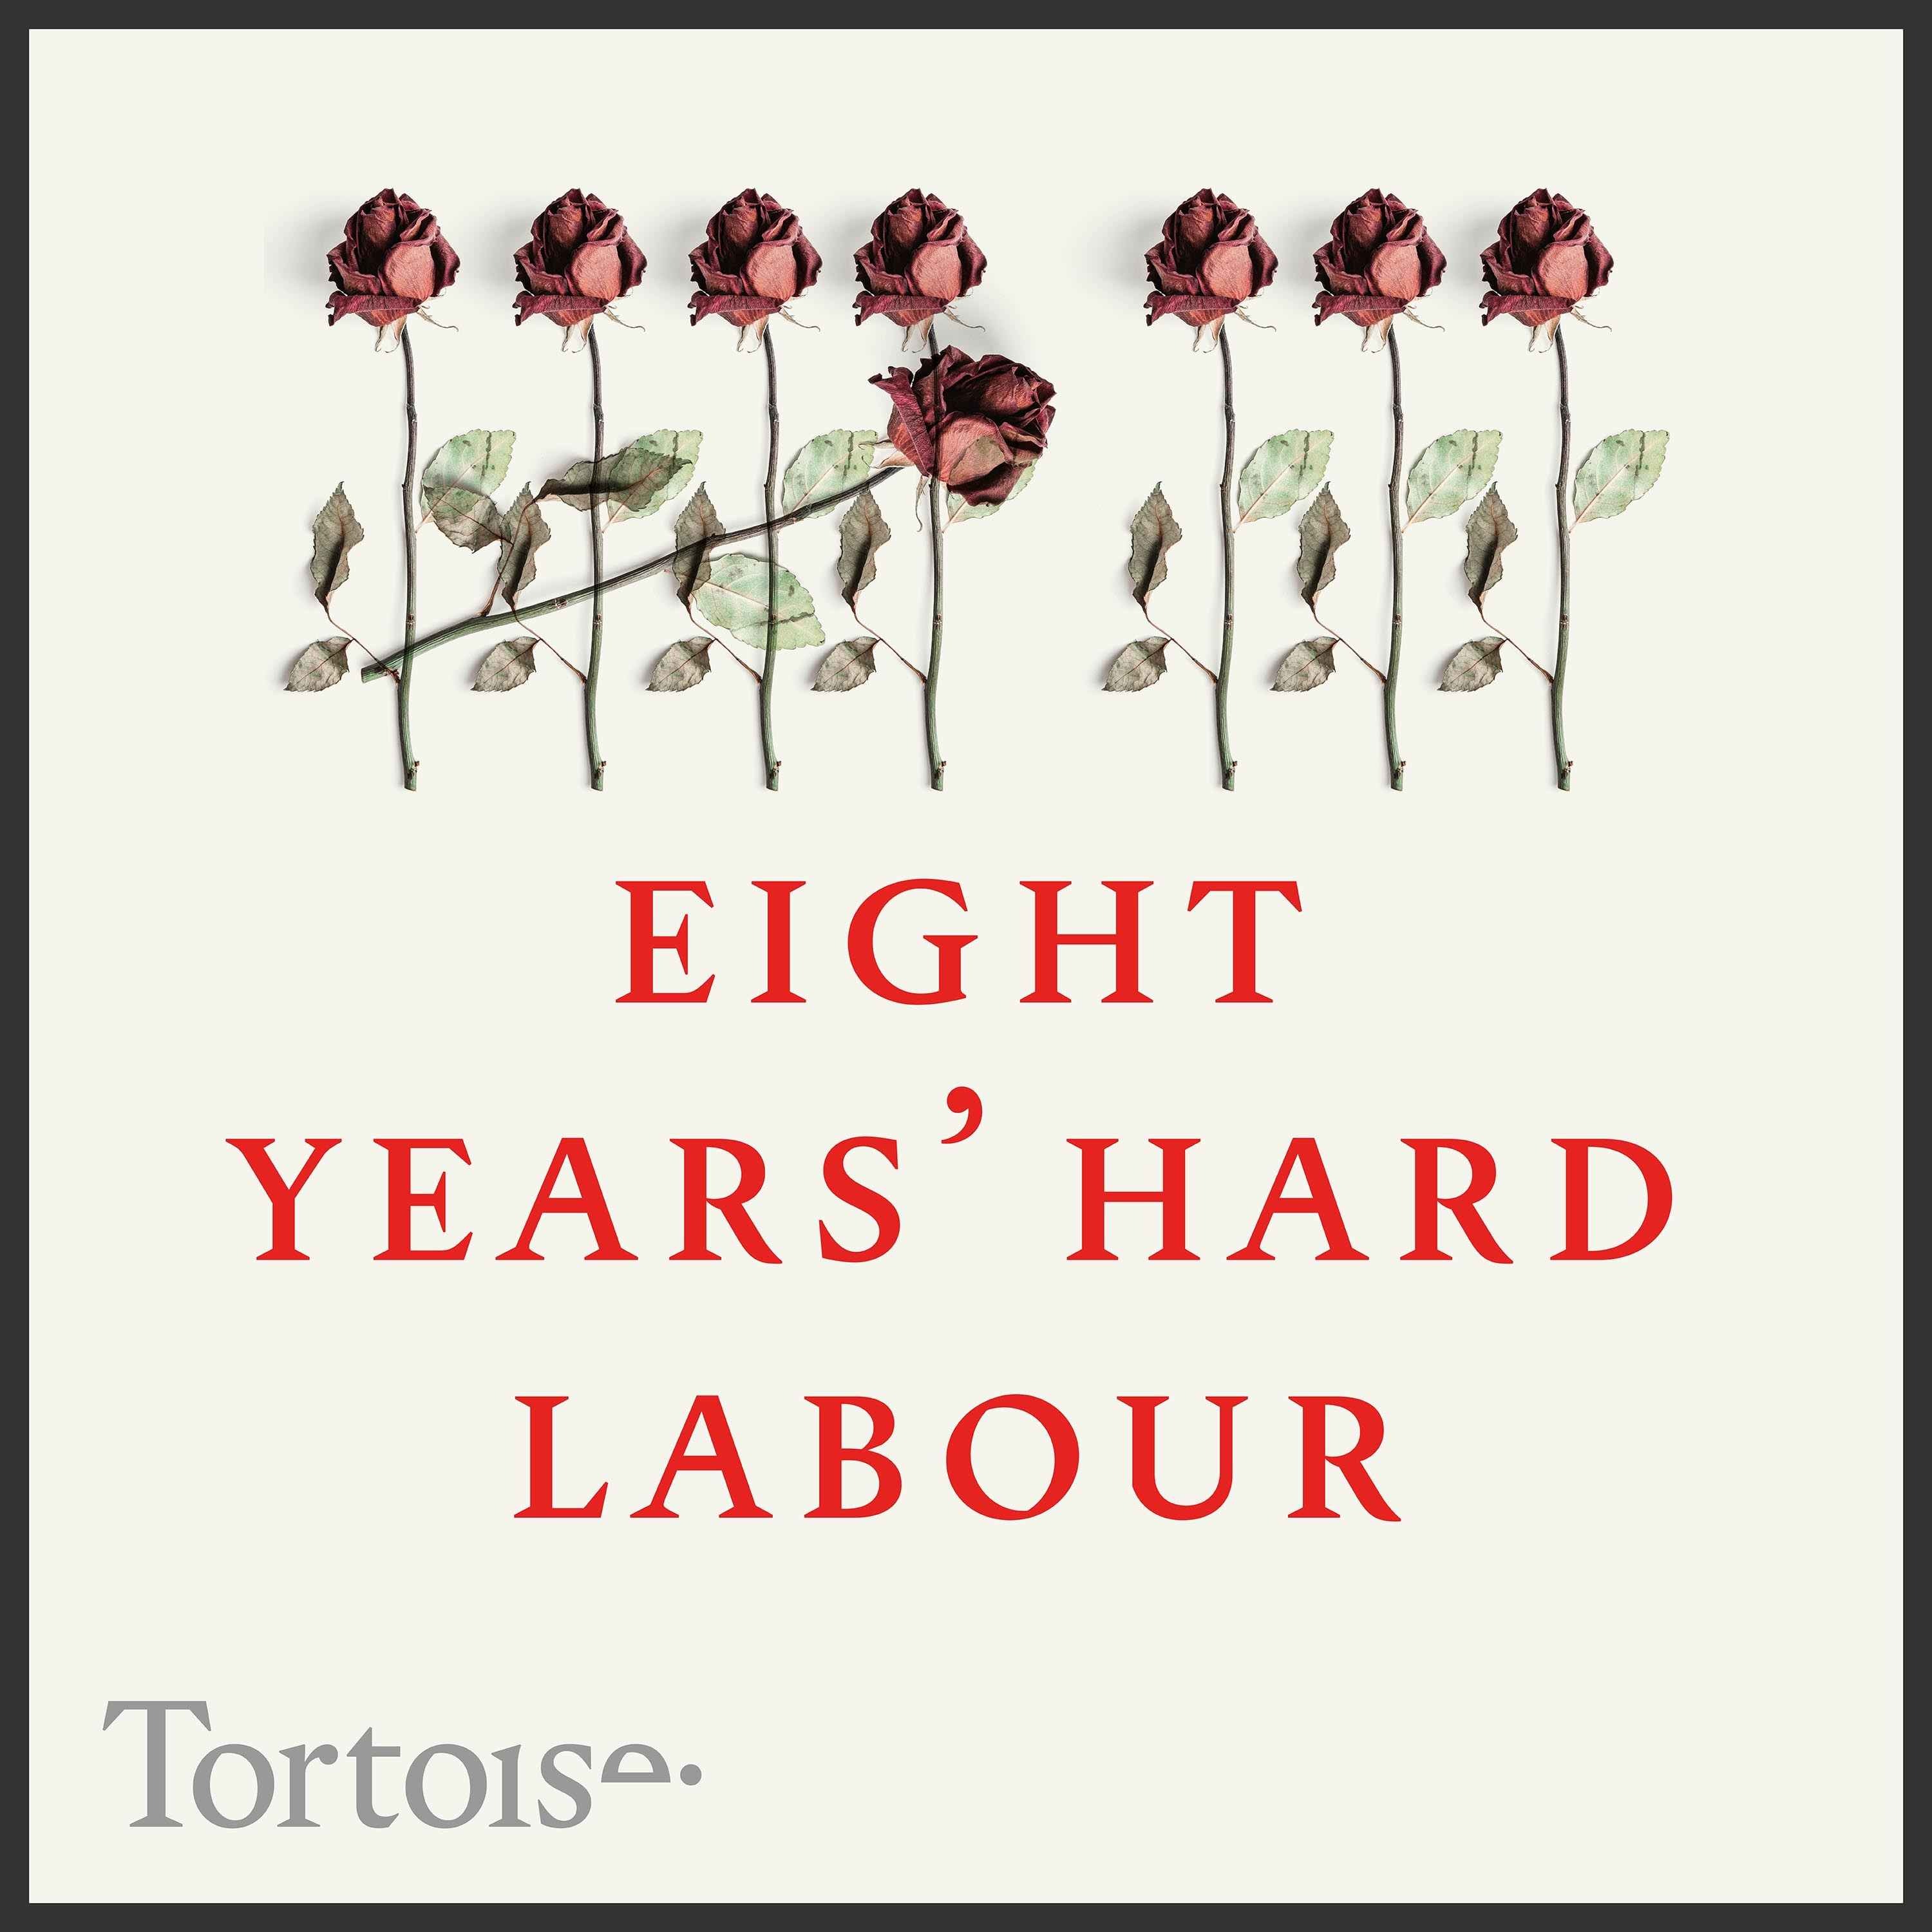 Introducing...Eight years’ hard Labour